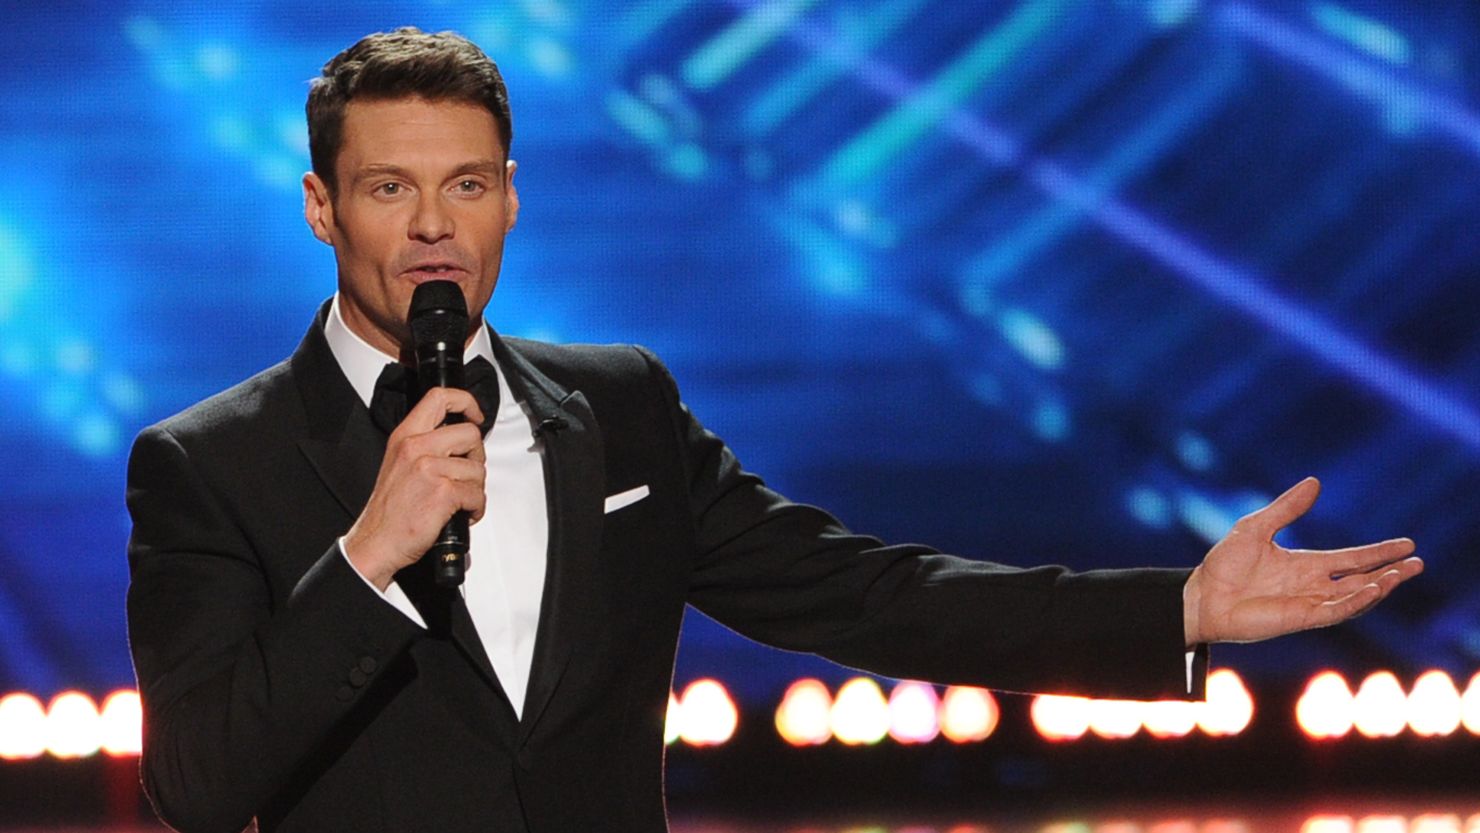 Ryan Seacrest hosts the "American Idol" XIII finale on May 21, which is on Fox.